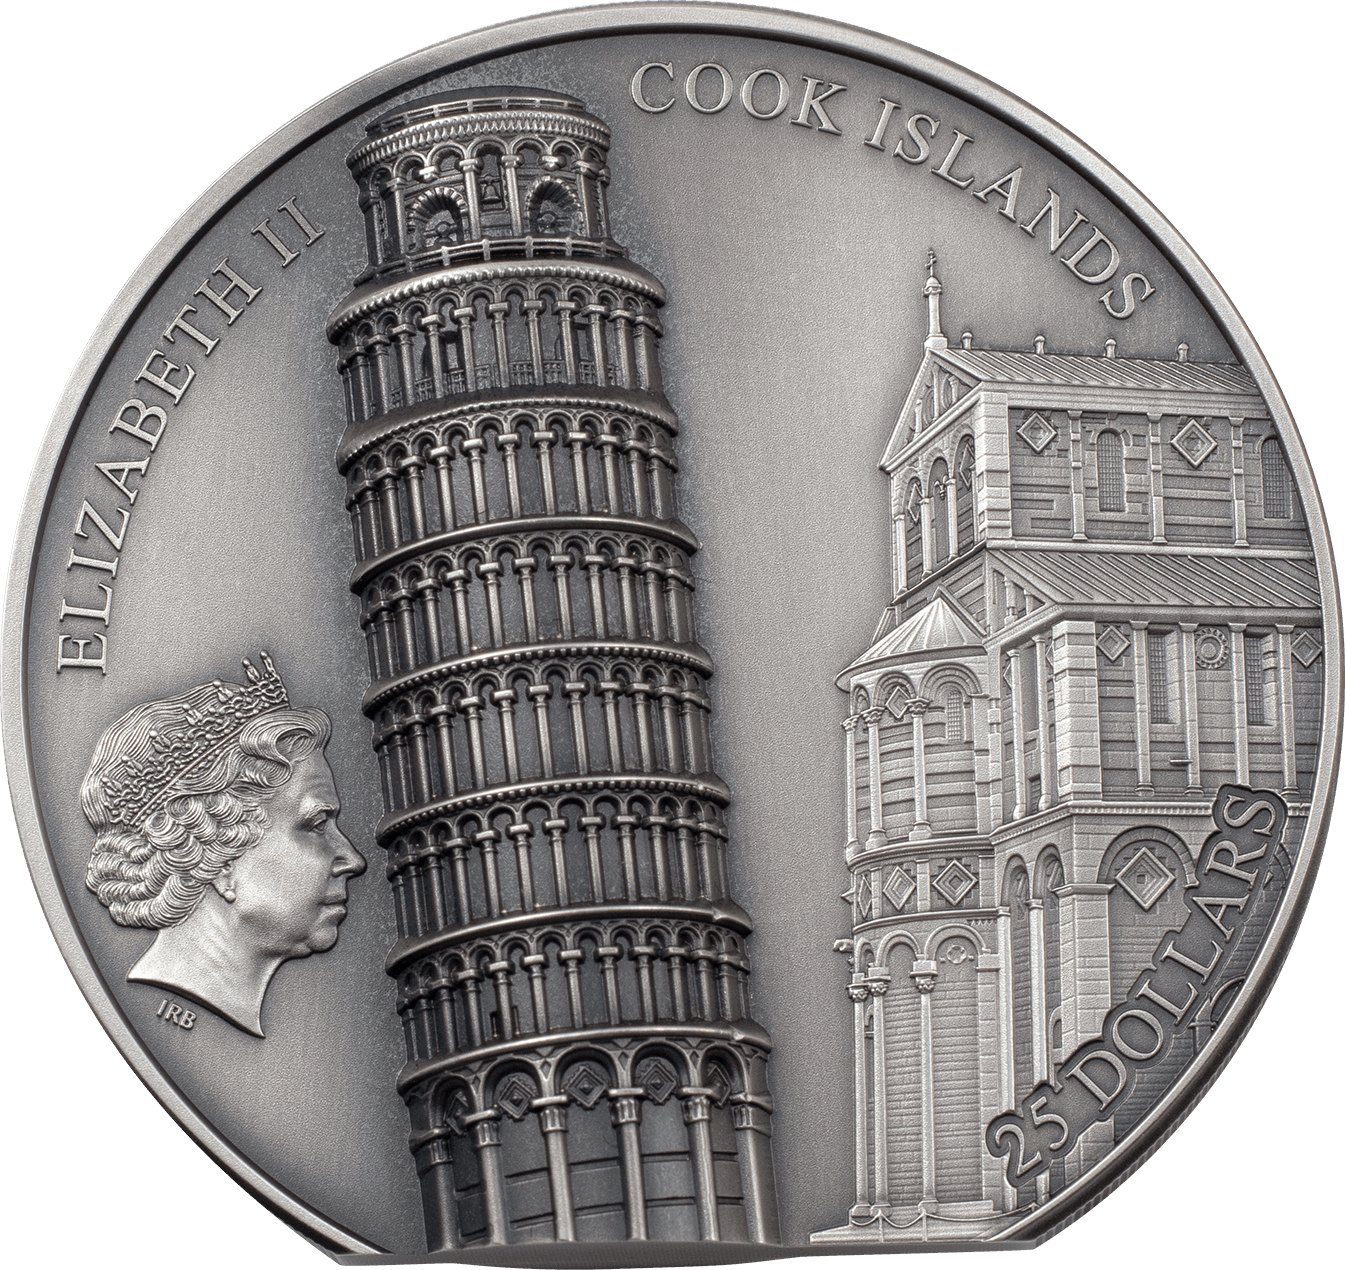 LEANING TOWER OF PISA 5 Oz Silver Coin $25 Cook Islands 2022 - PARTHAVA COIN